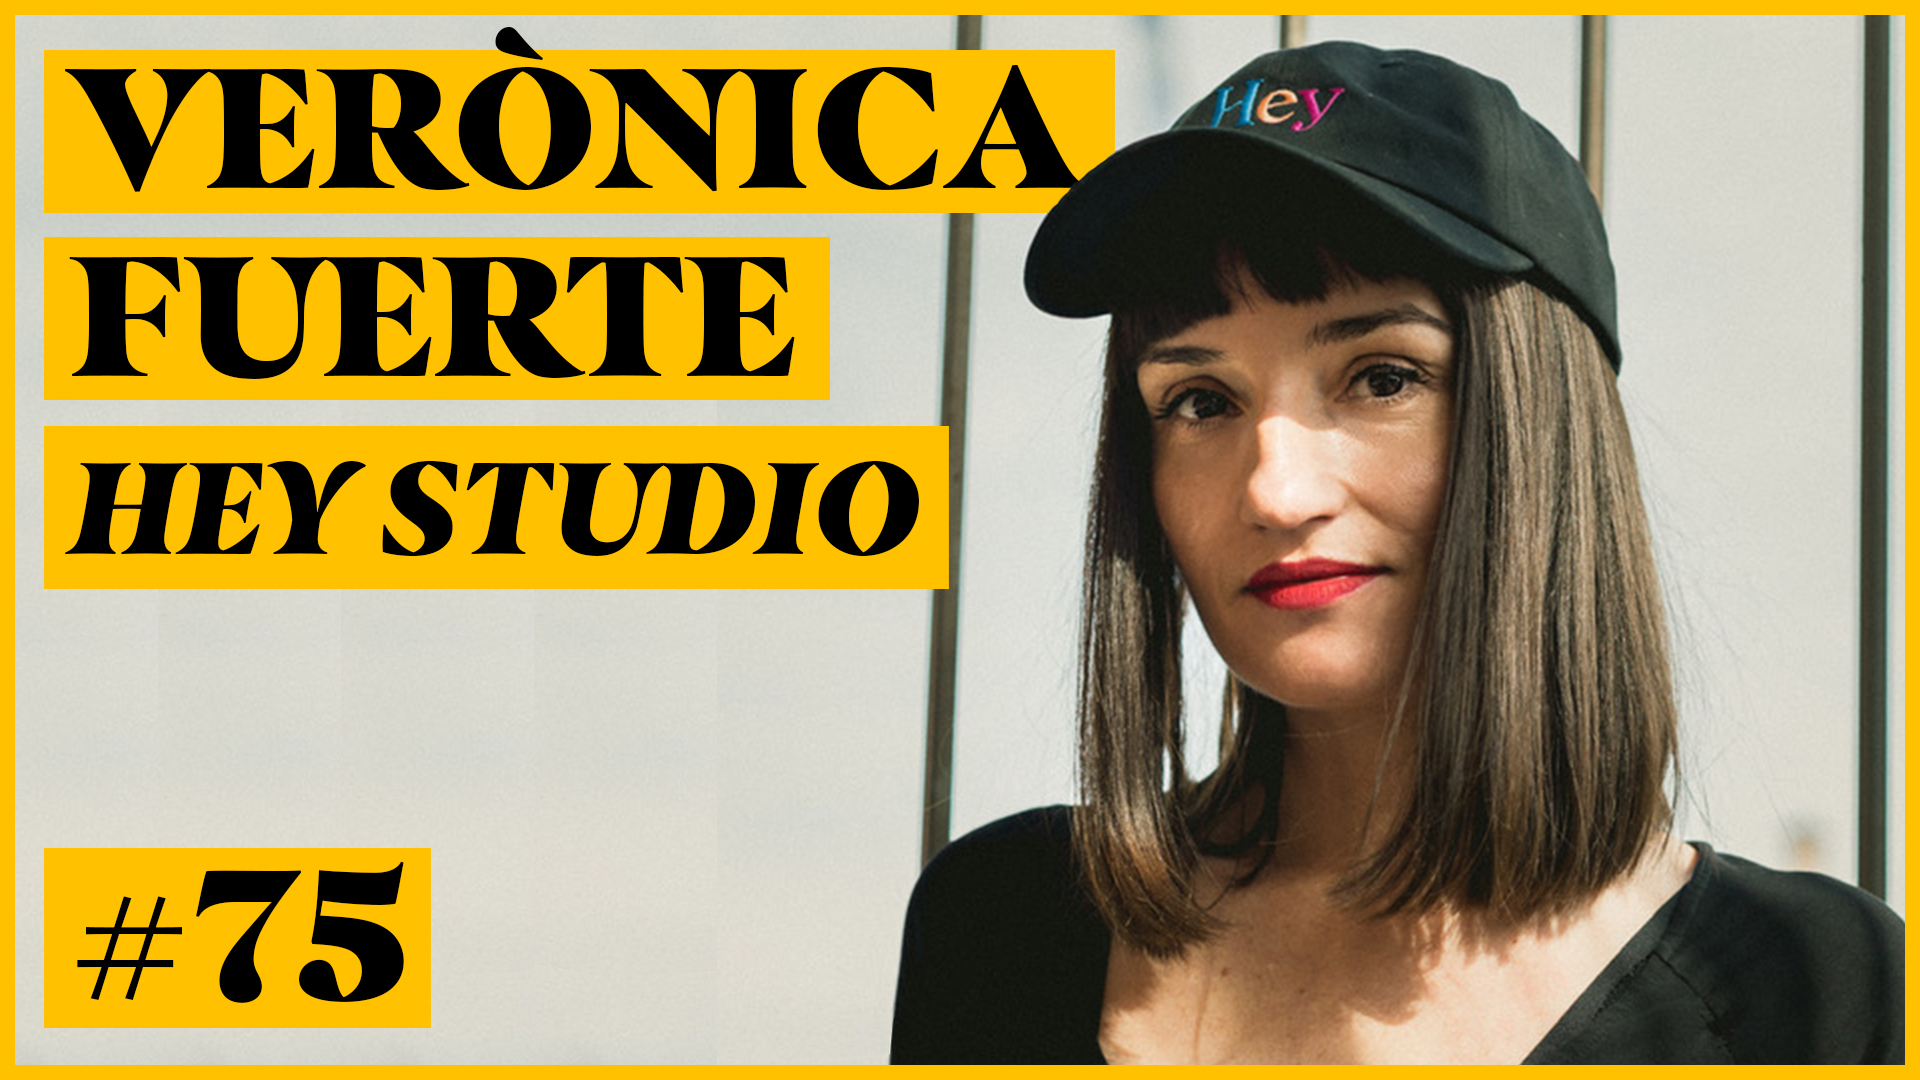 75. Verònica Fuerte, Hey – Being A Woman In A Male-Dominated Industry, Client Outreach, Using Personal Project To Stand Out In The Crowd, and Growing & Managing A Team